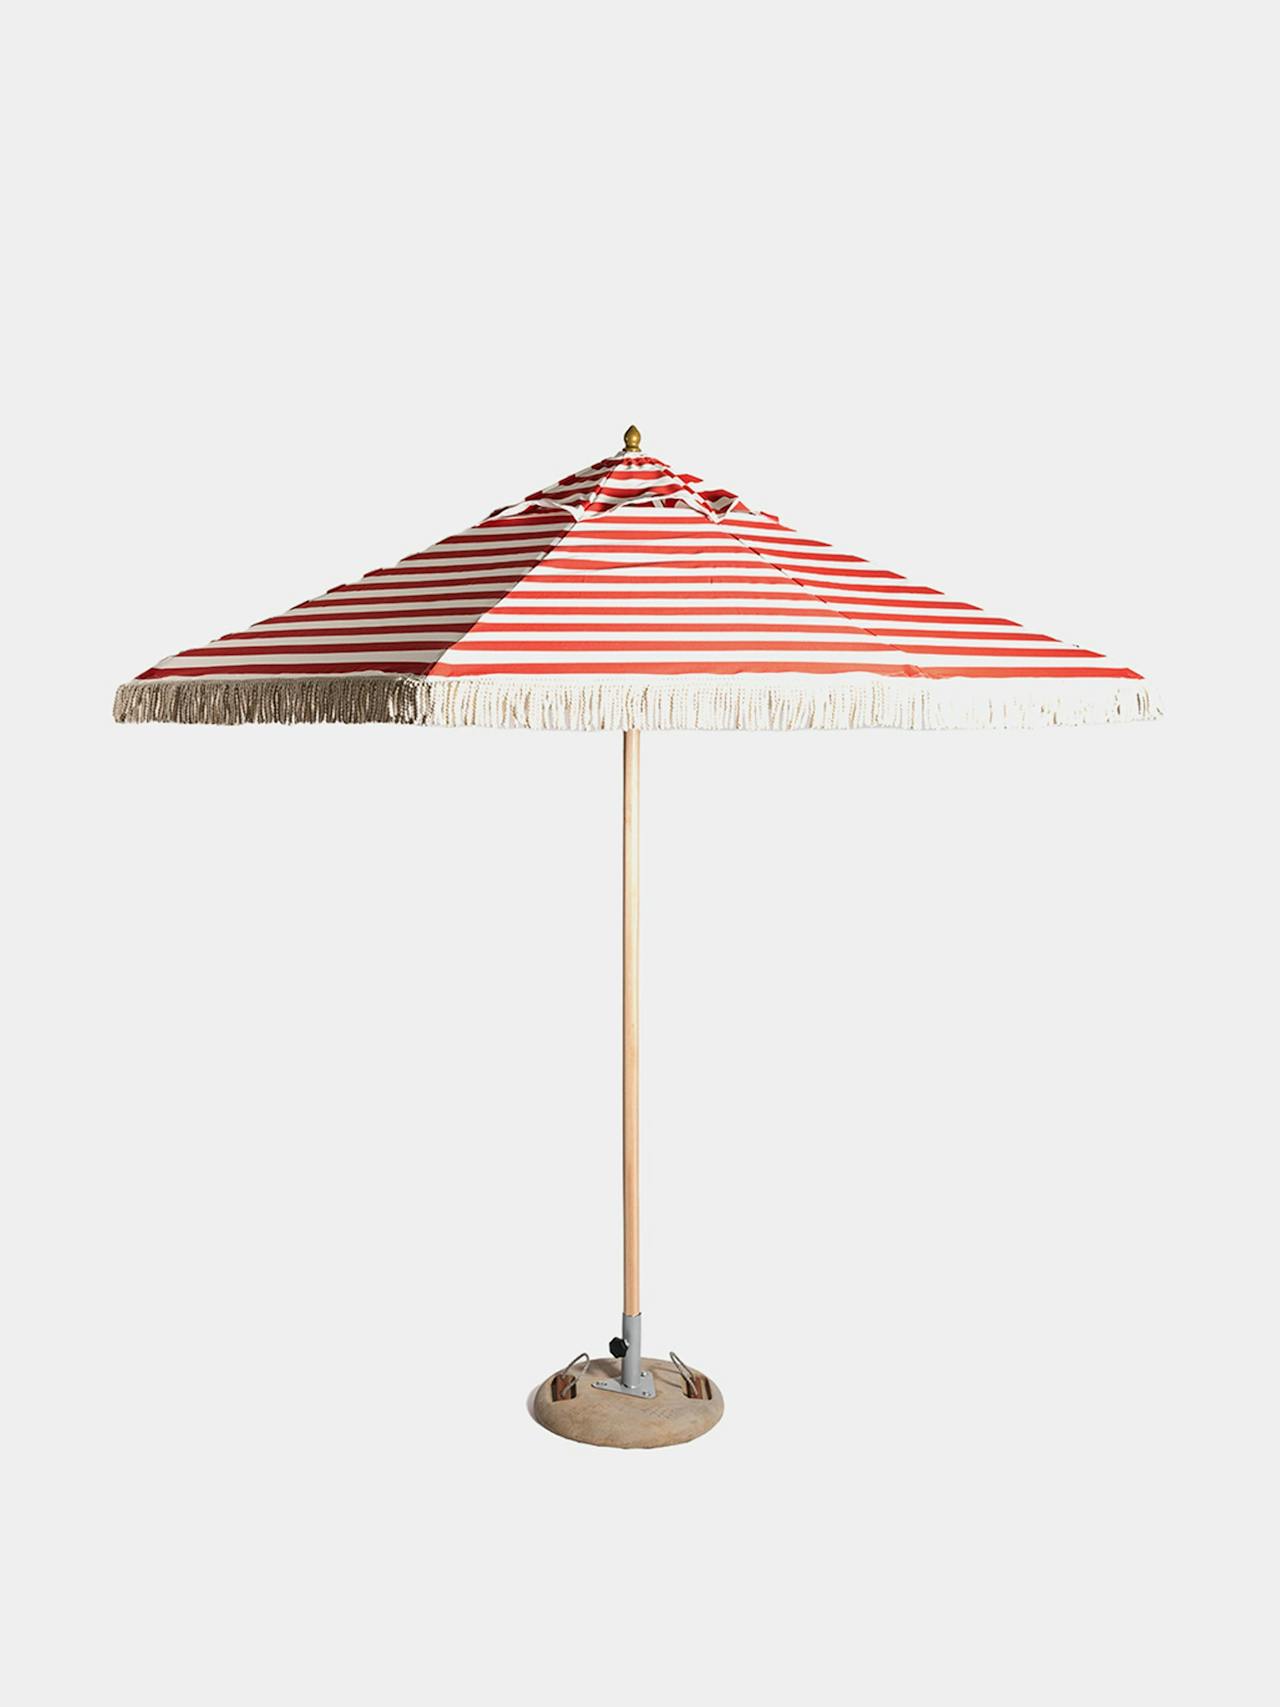 Parasol with tassels in red stripe, 400cm